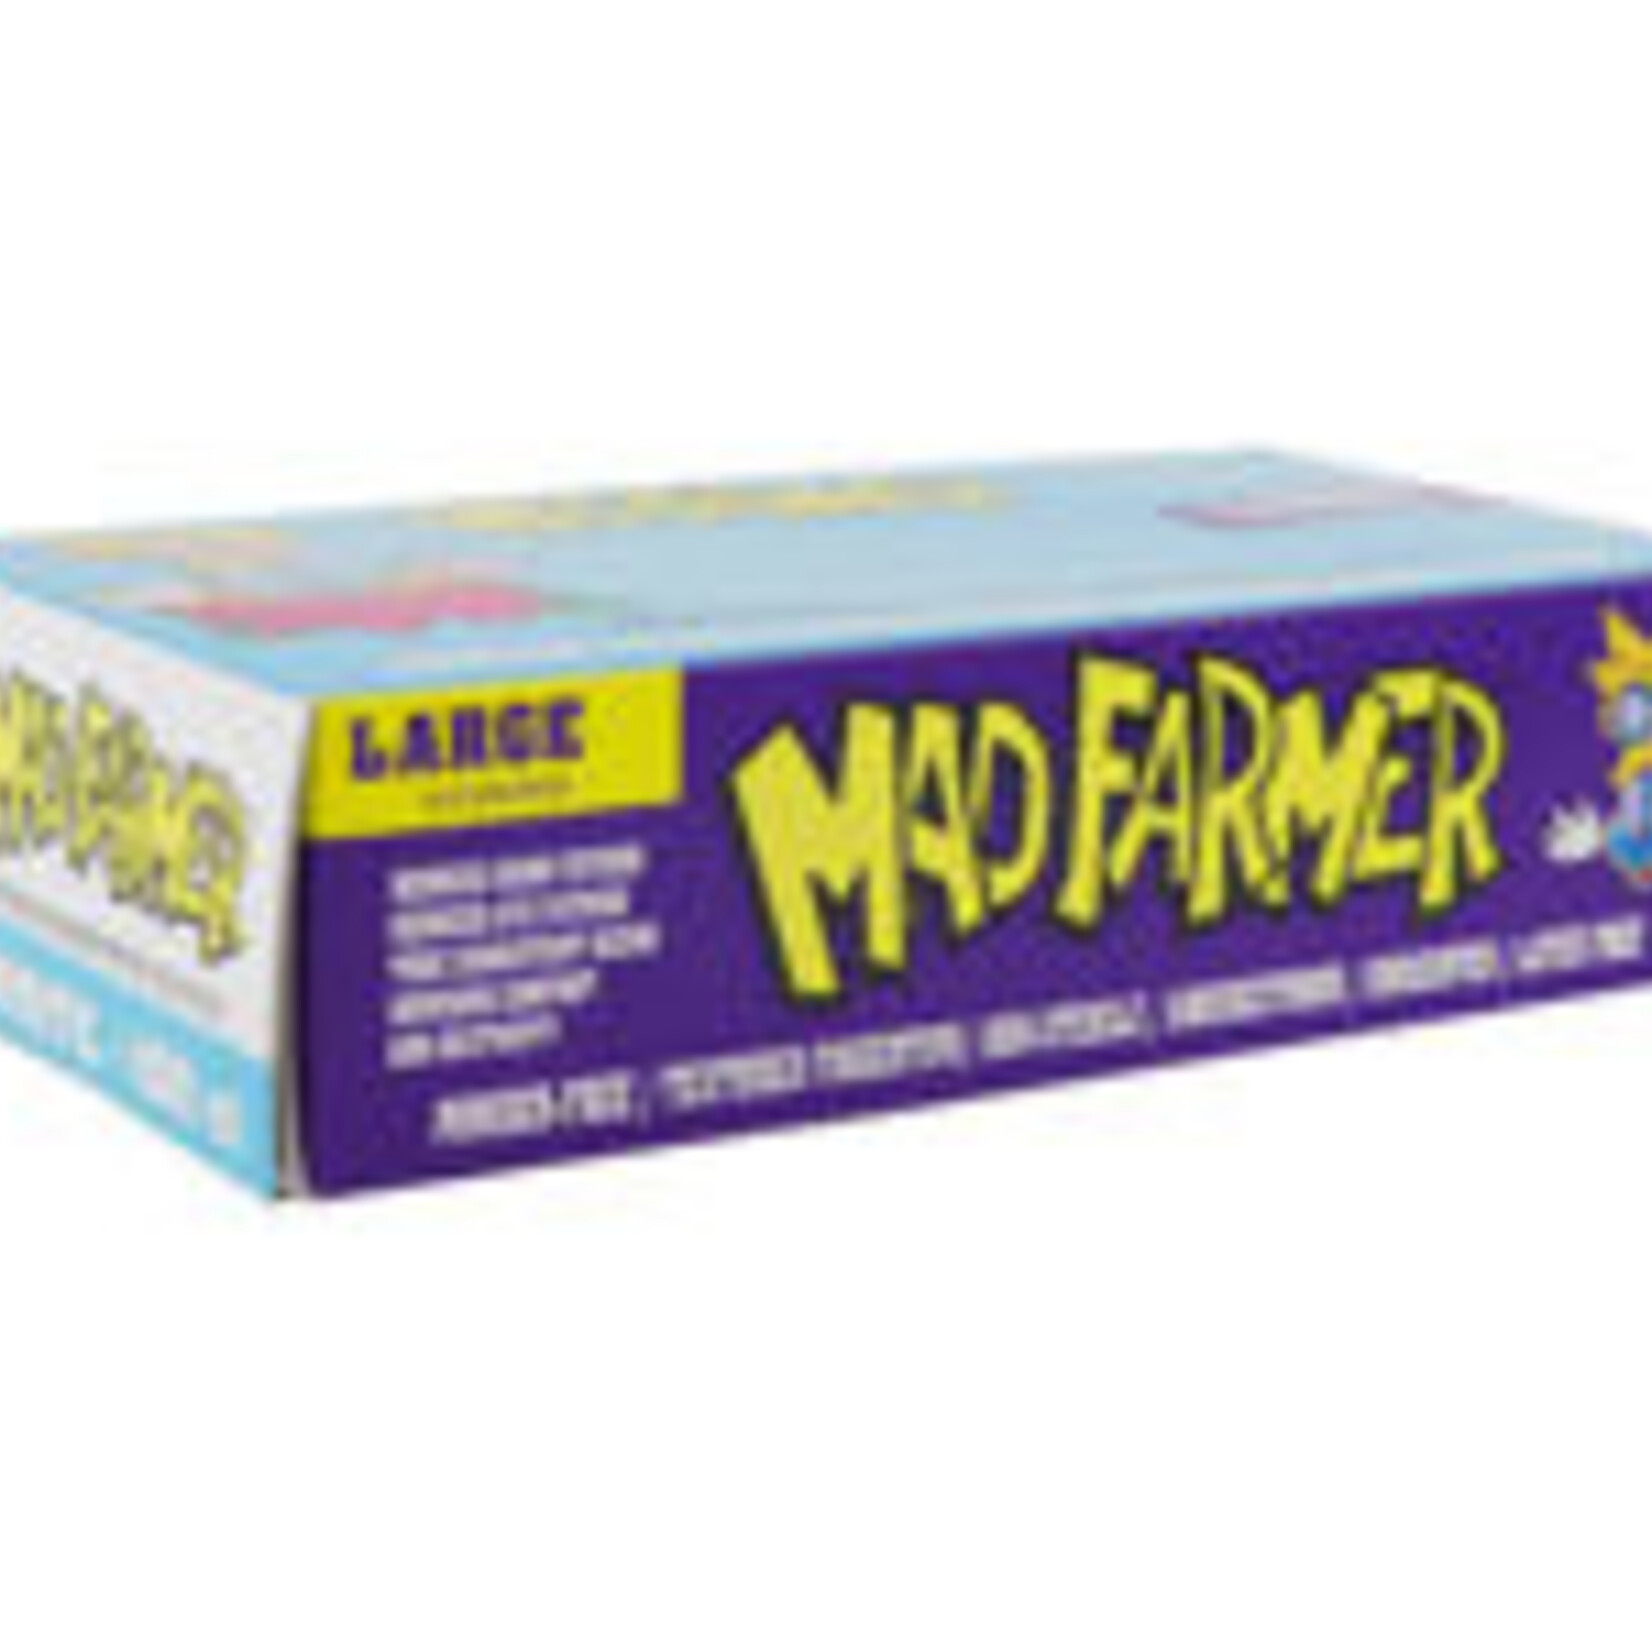 Mad Farmer Mad Farmer White Nitrile Gloves, Size Large, Box of 100